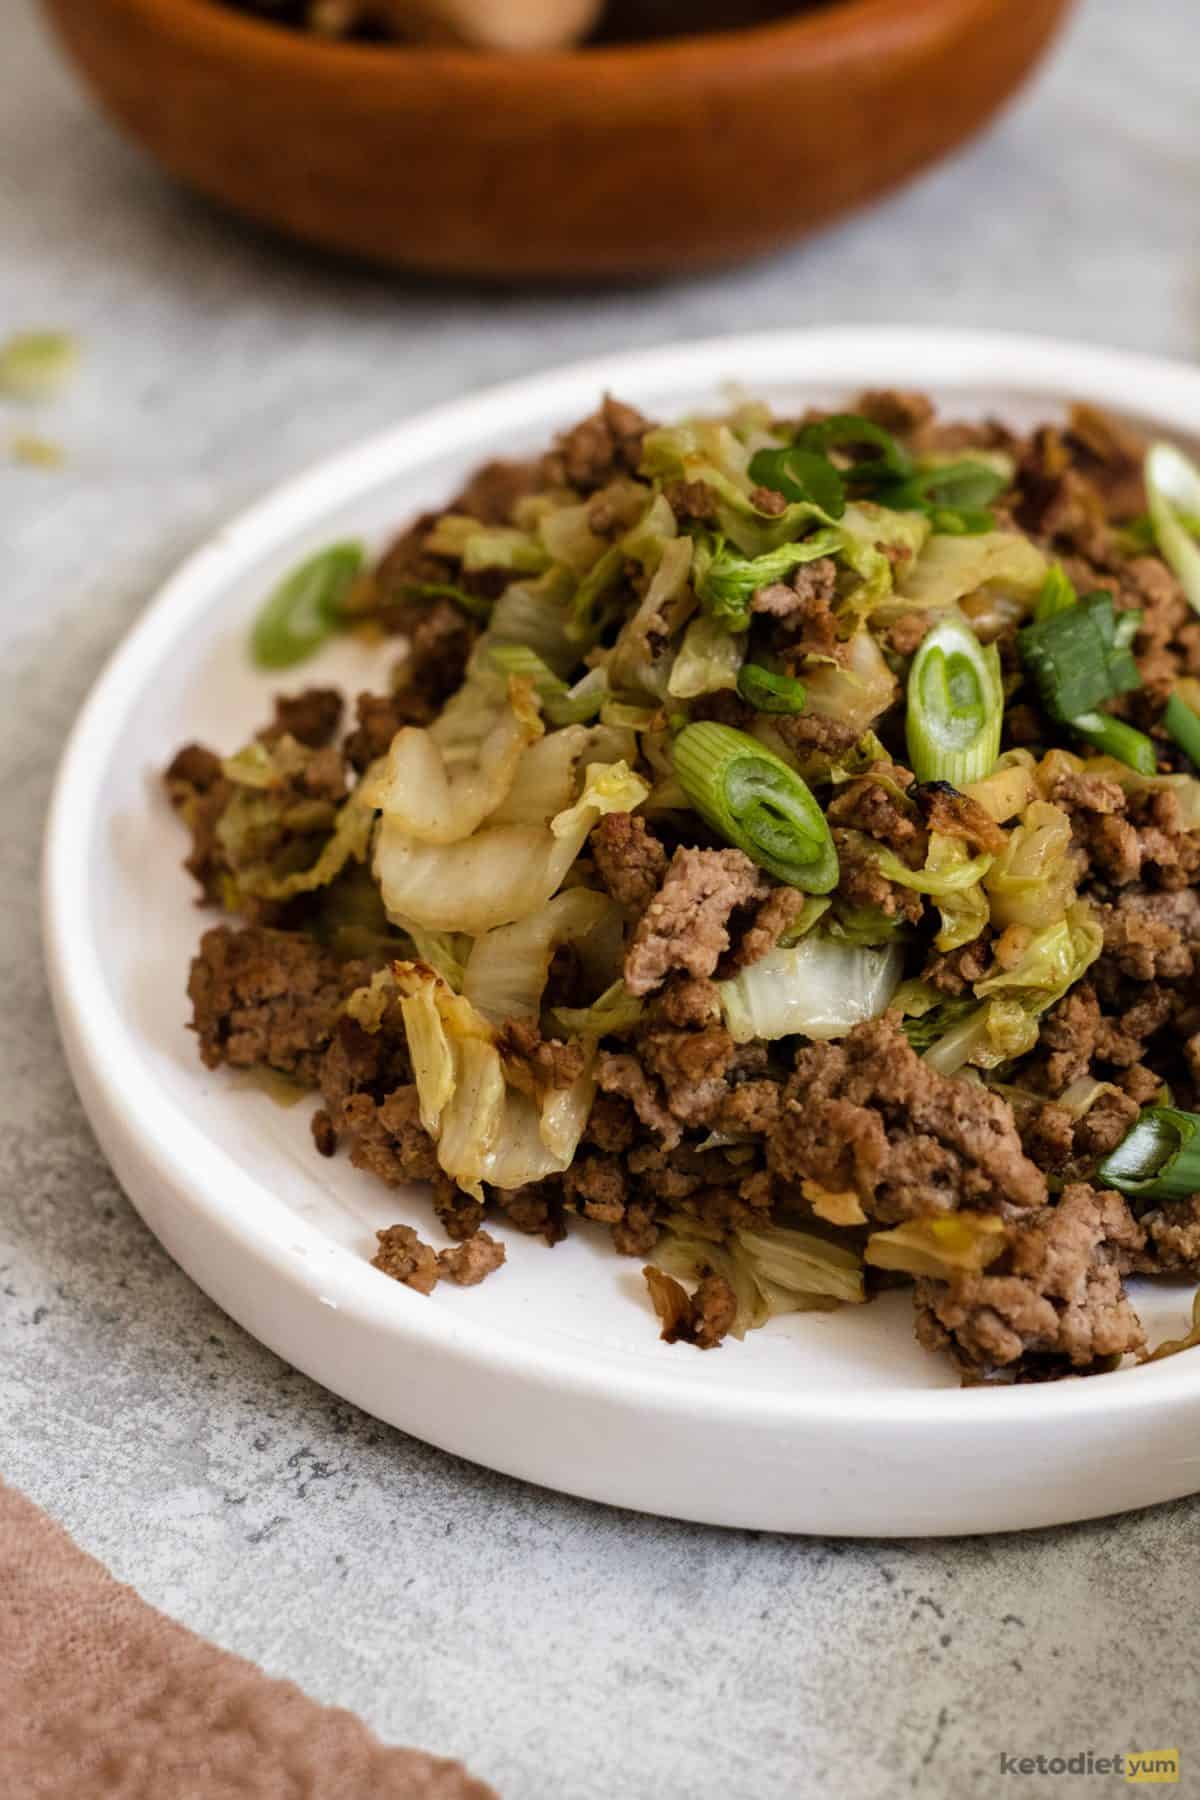 A Chinese cabbage recipe made into a keto stir fry